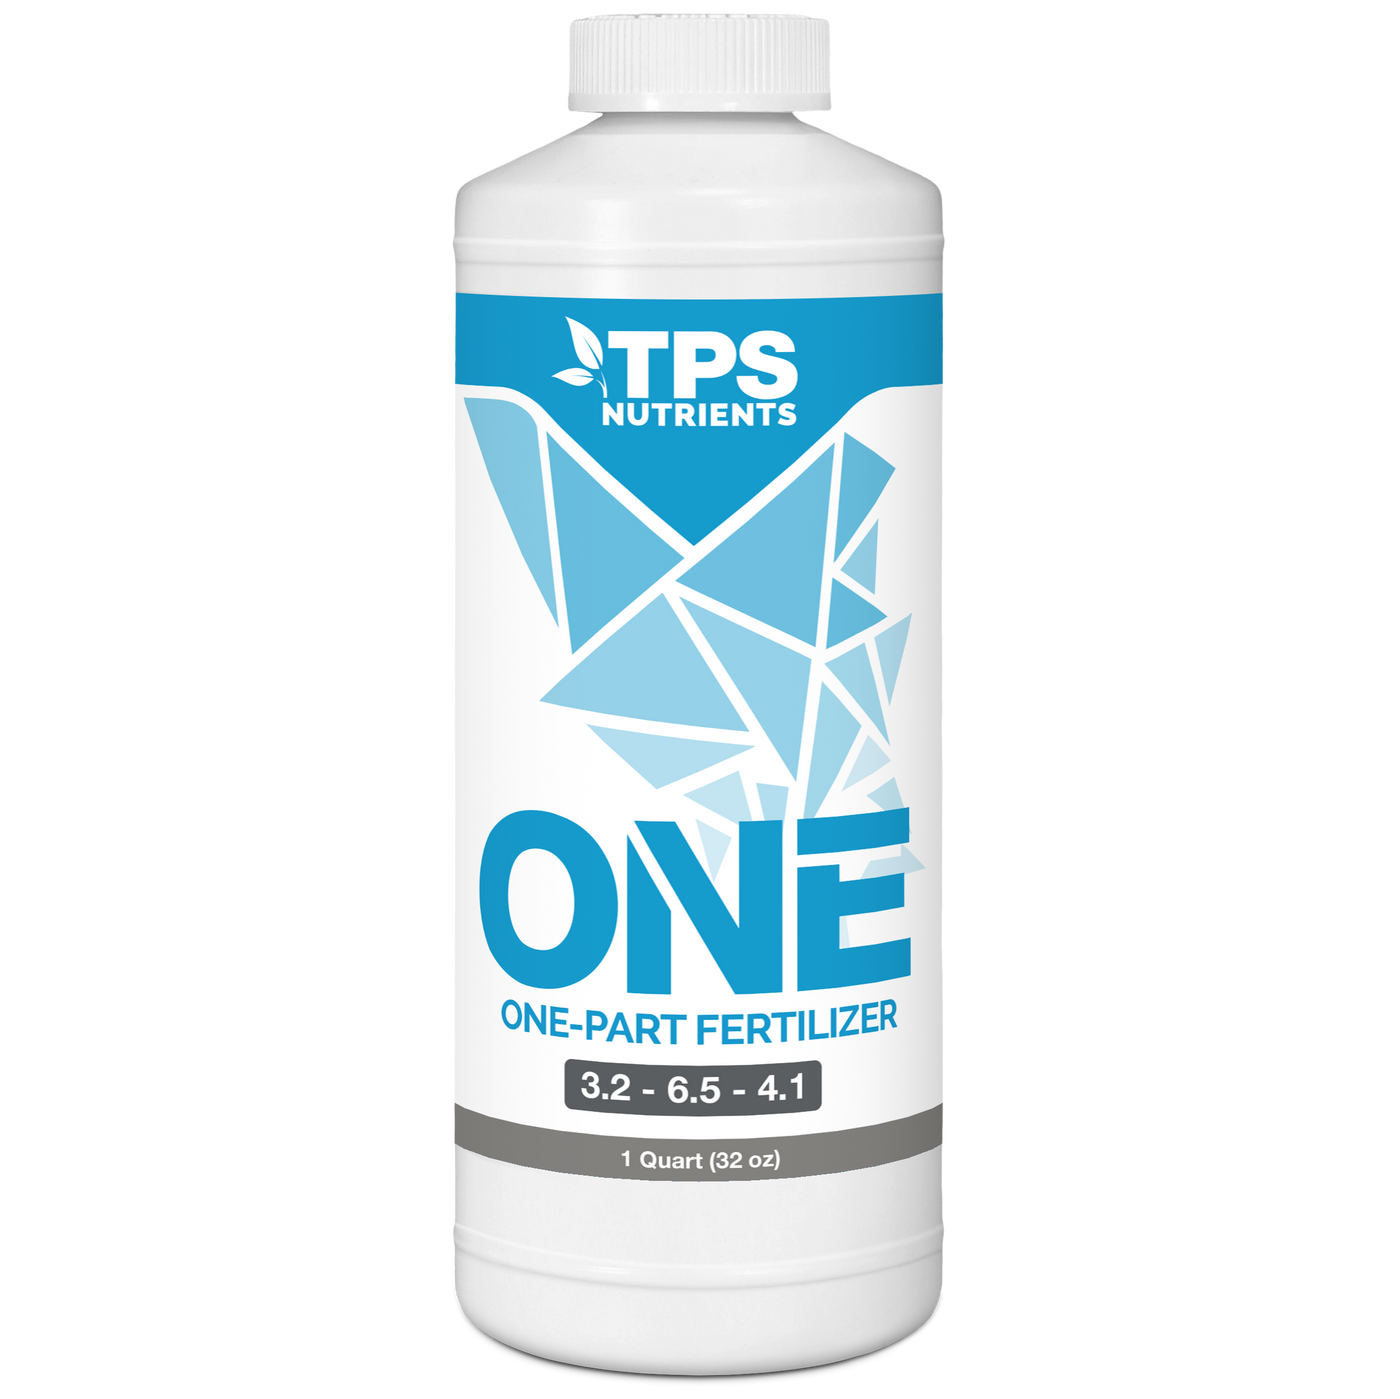 TPS ONE™ | All-In-One